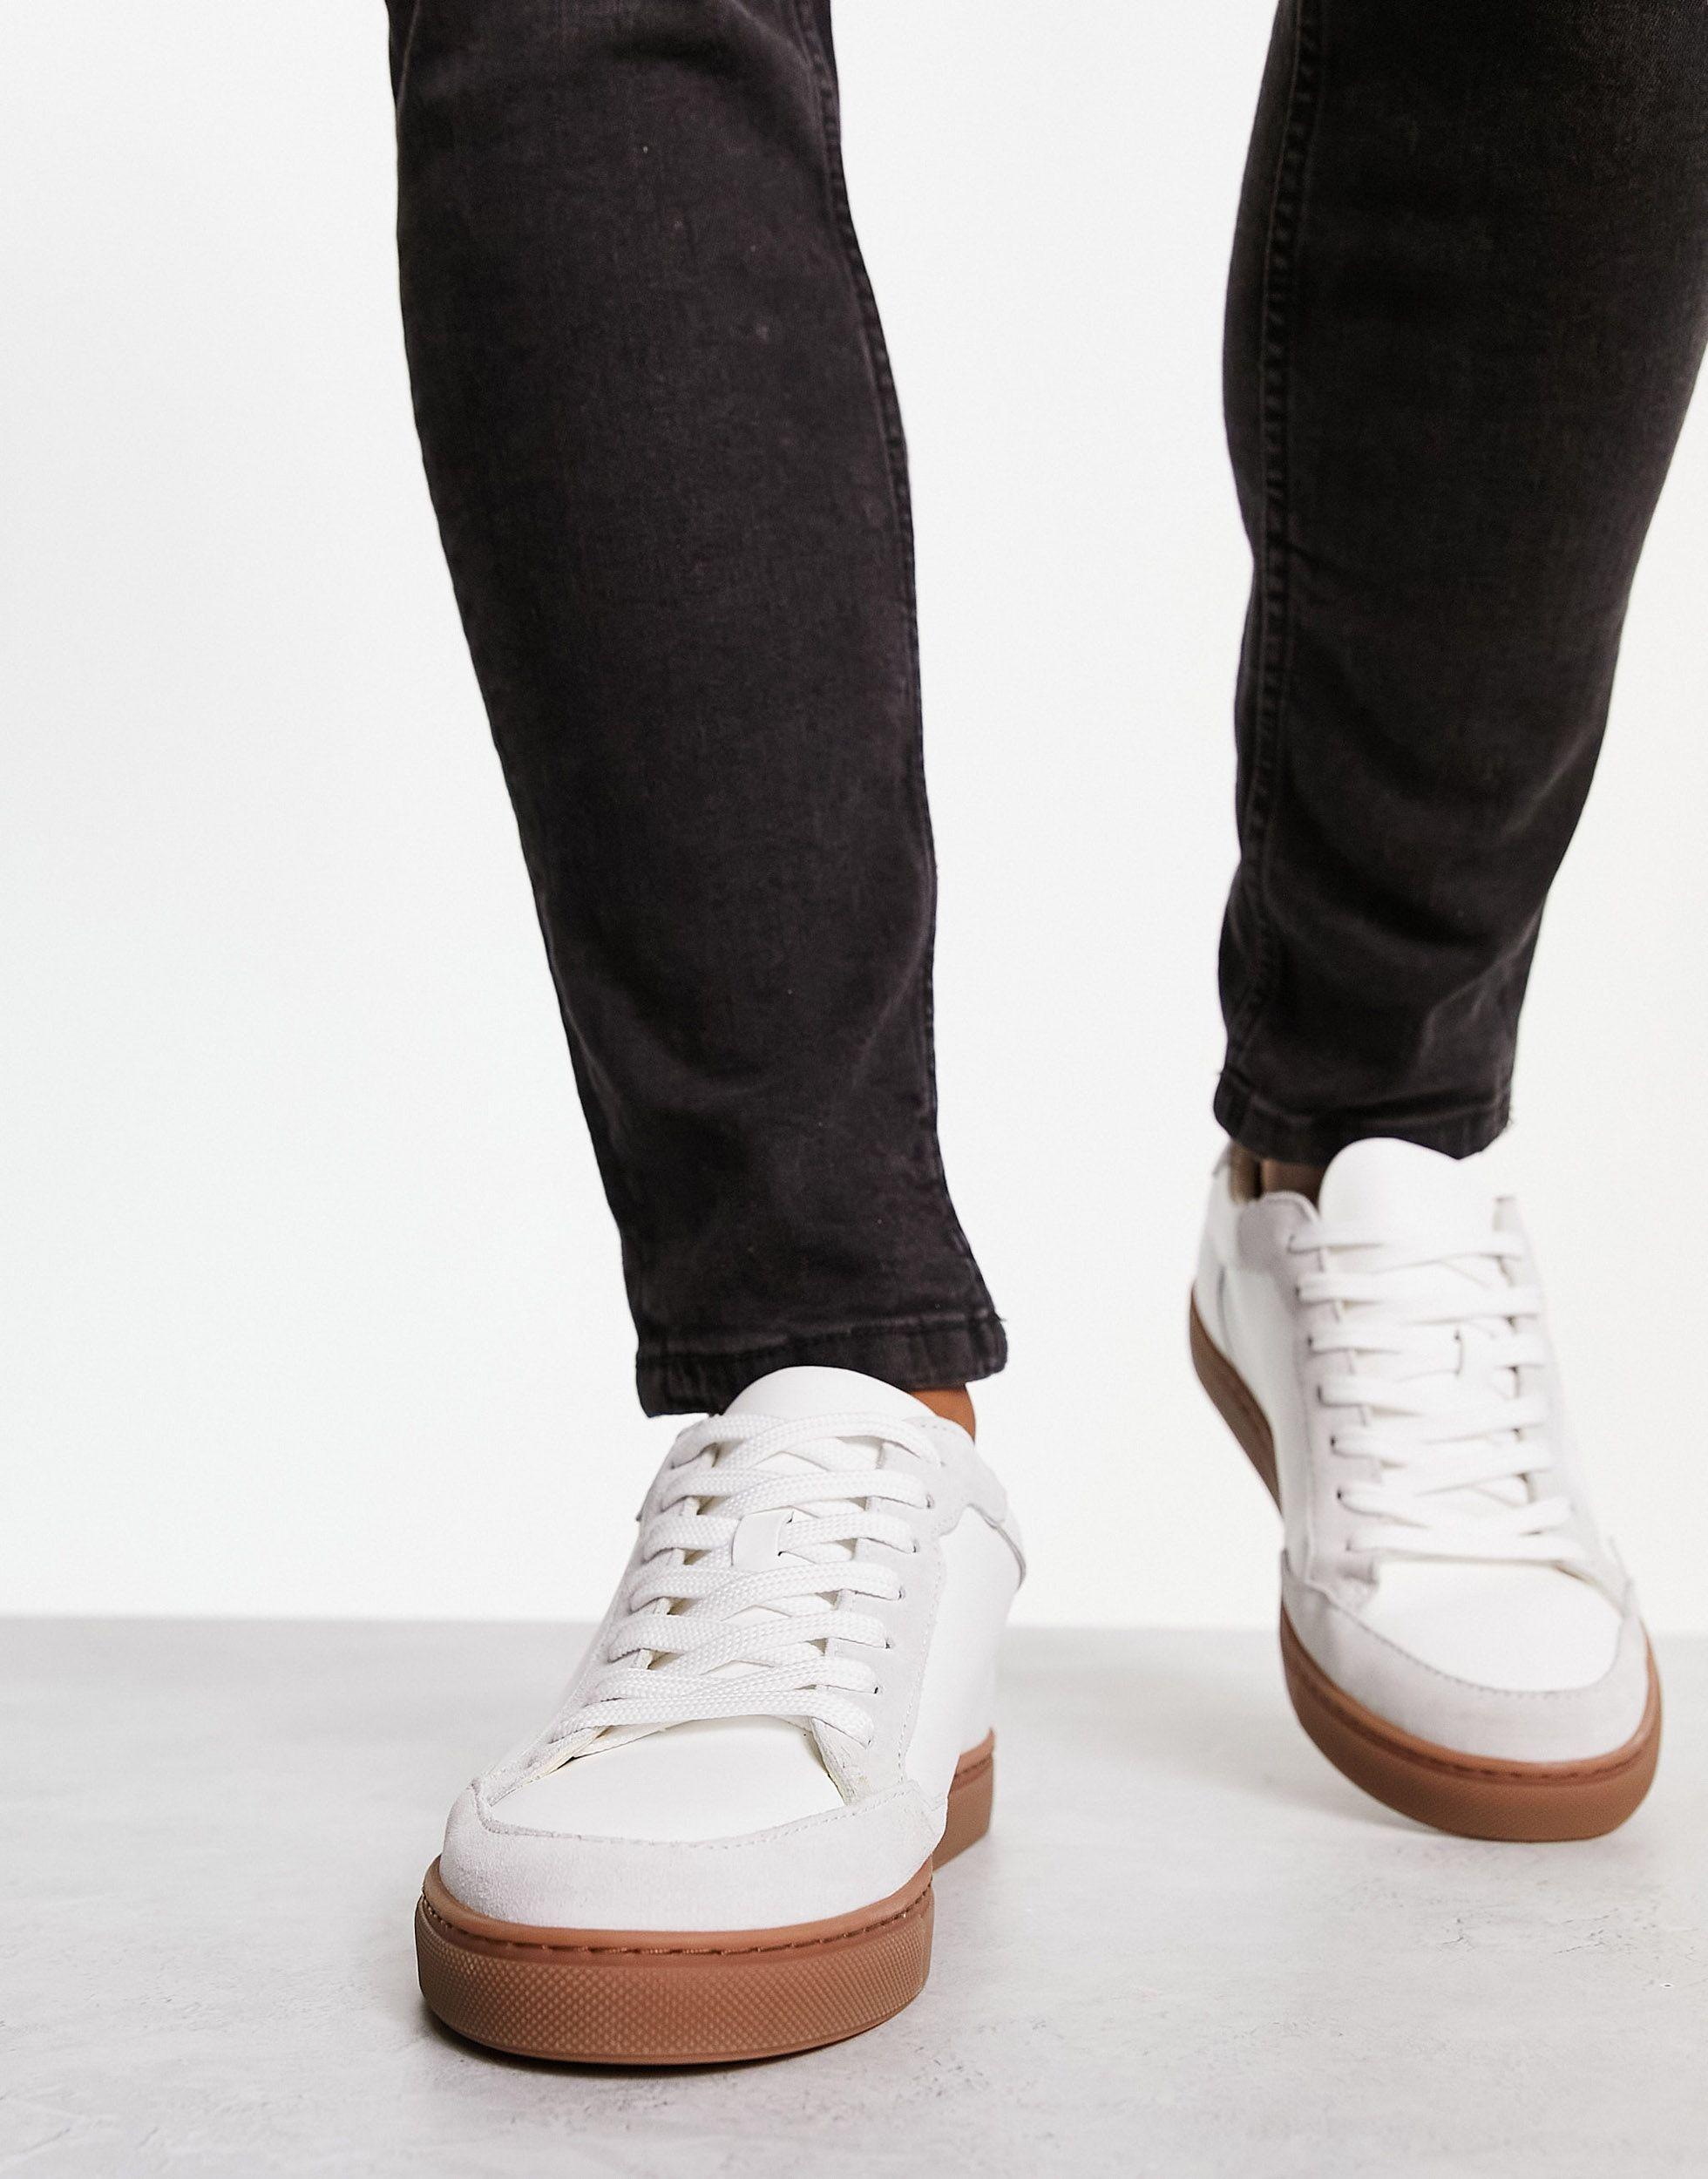 SELECTED Retro Sneakers With Gum Sole in Black for Men | Lyst